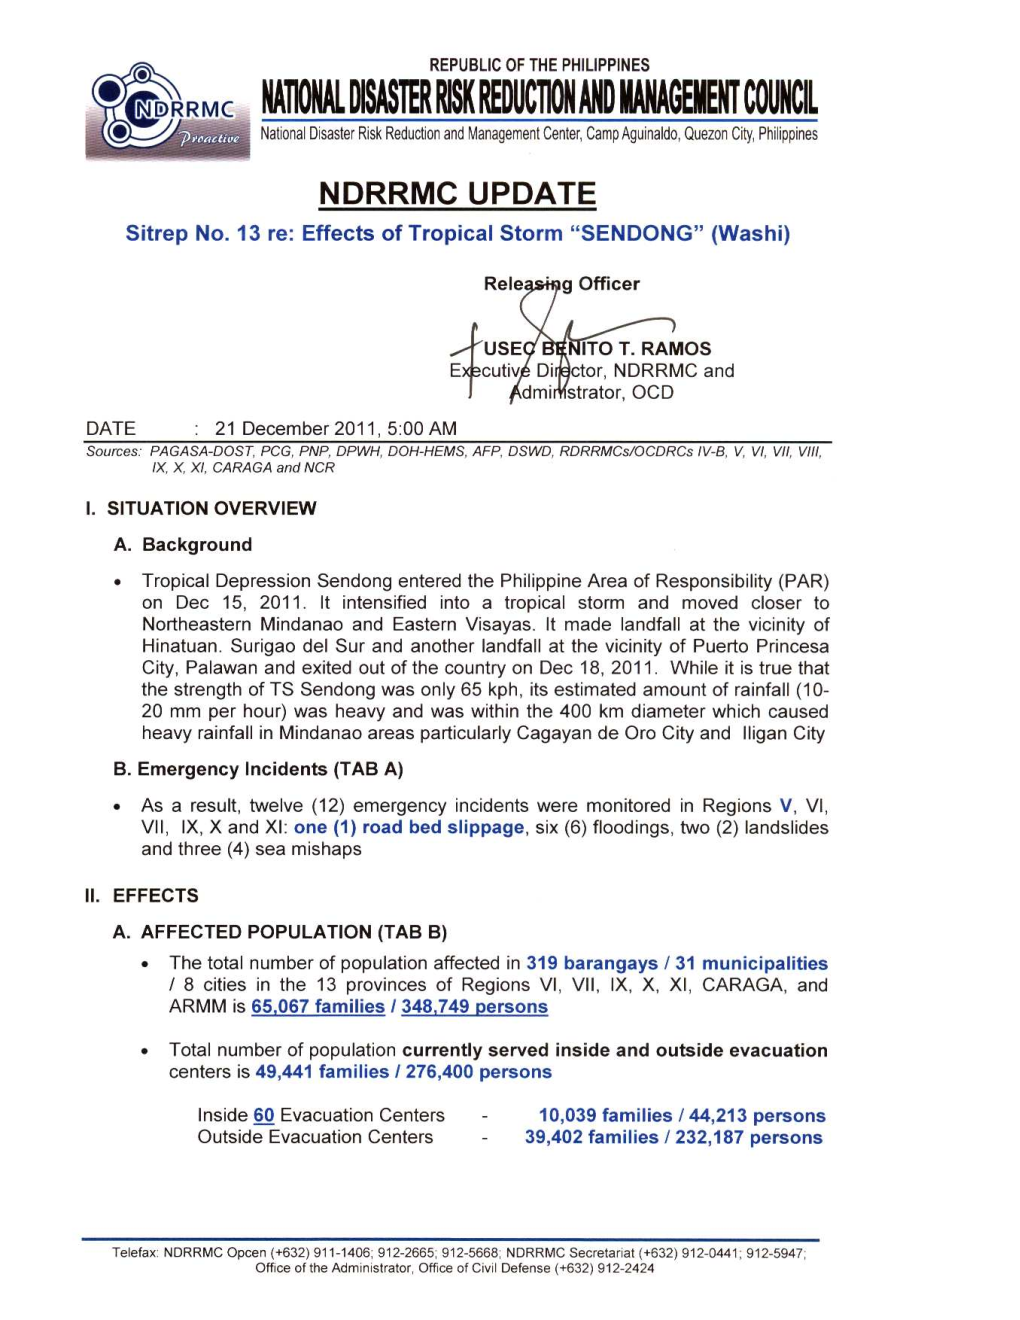 NDRRMC UPDATE Sitrep No 13 Re Effects of TS SENDONG